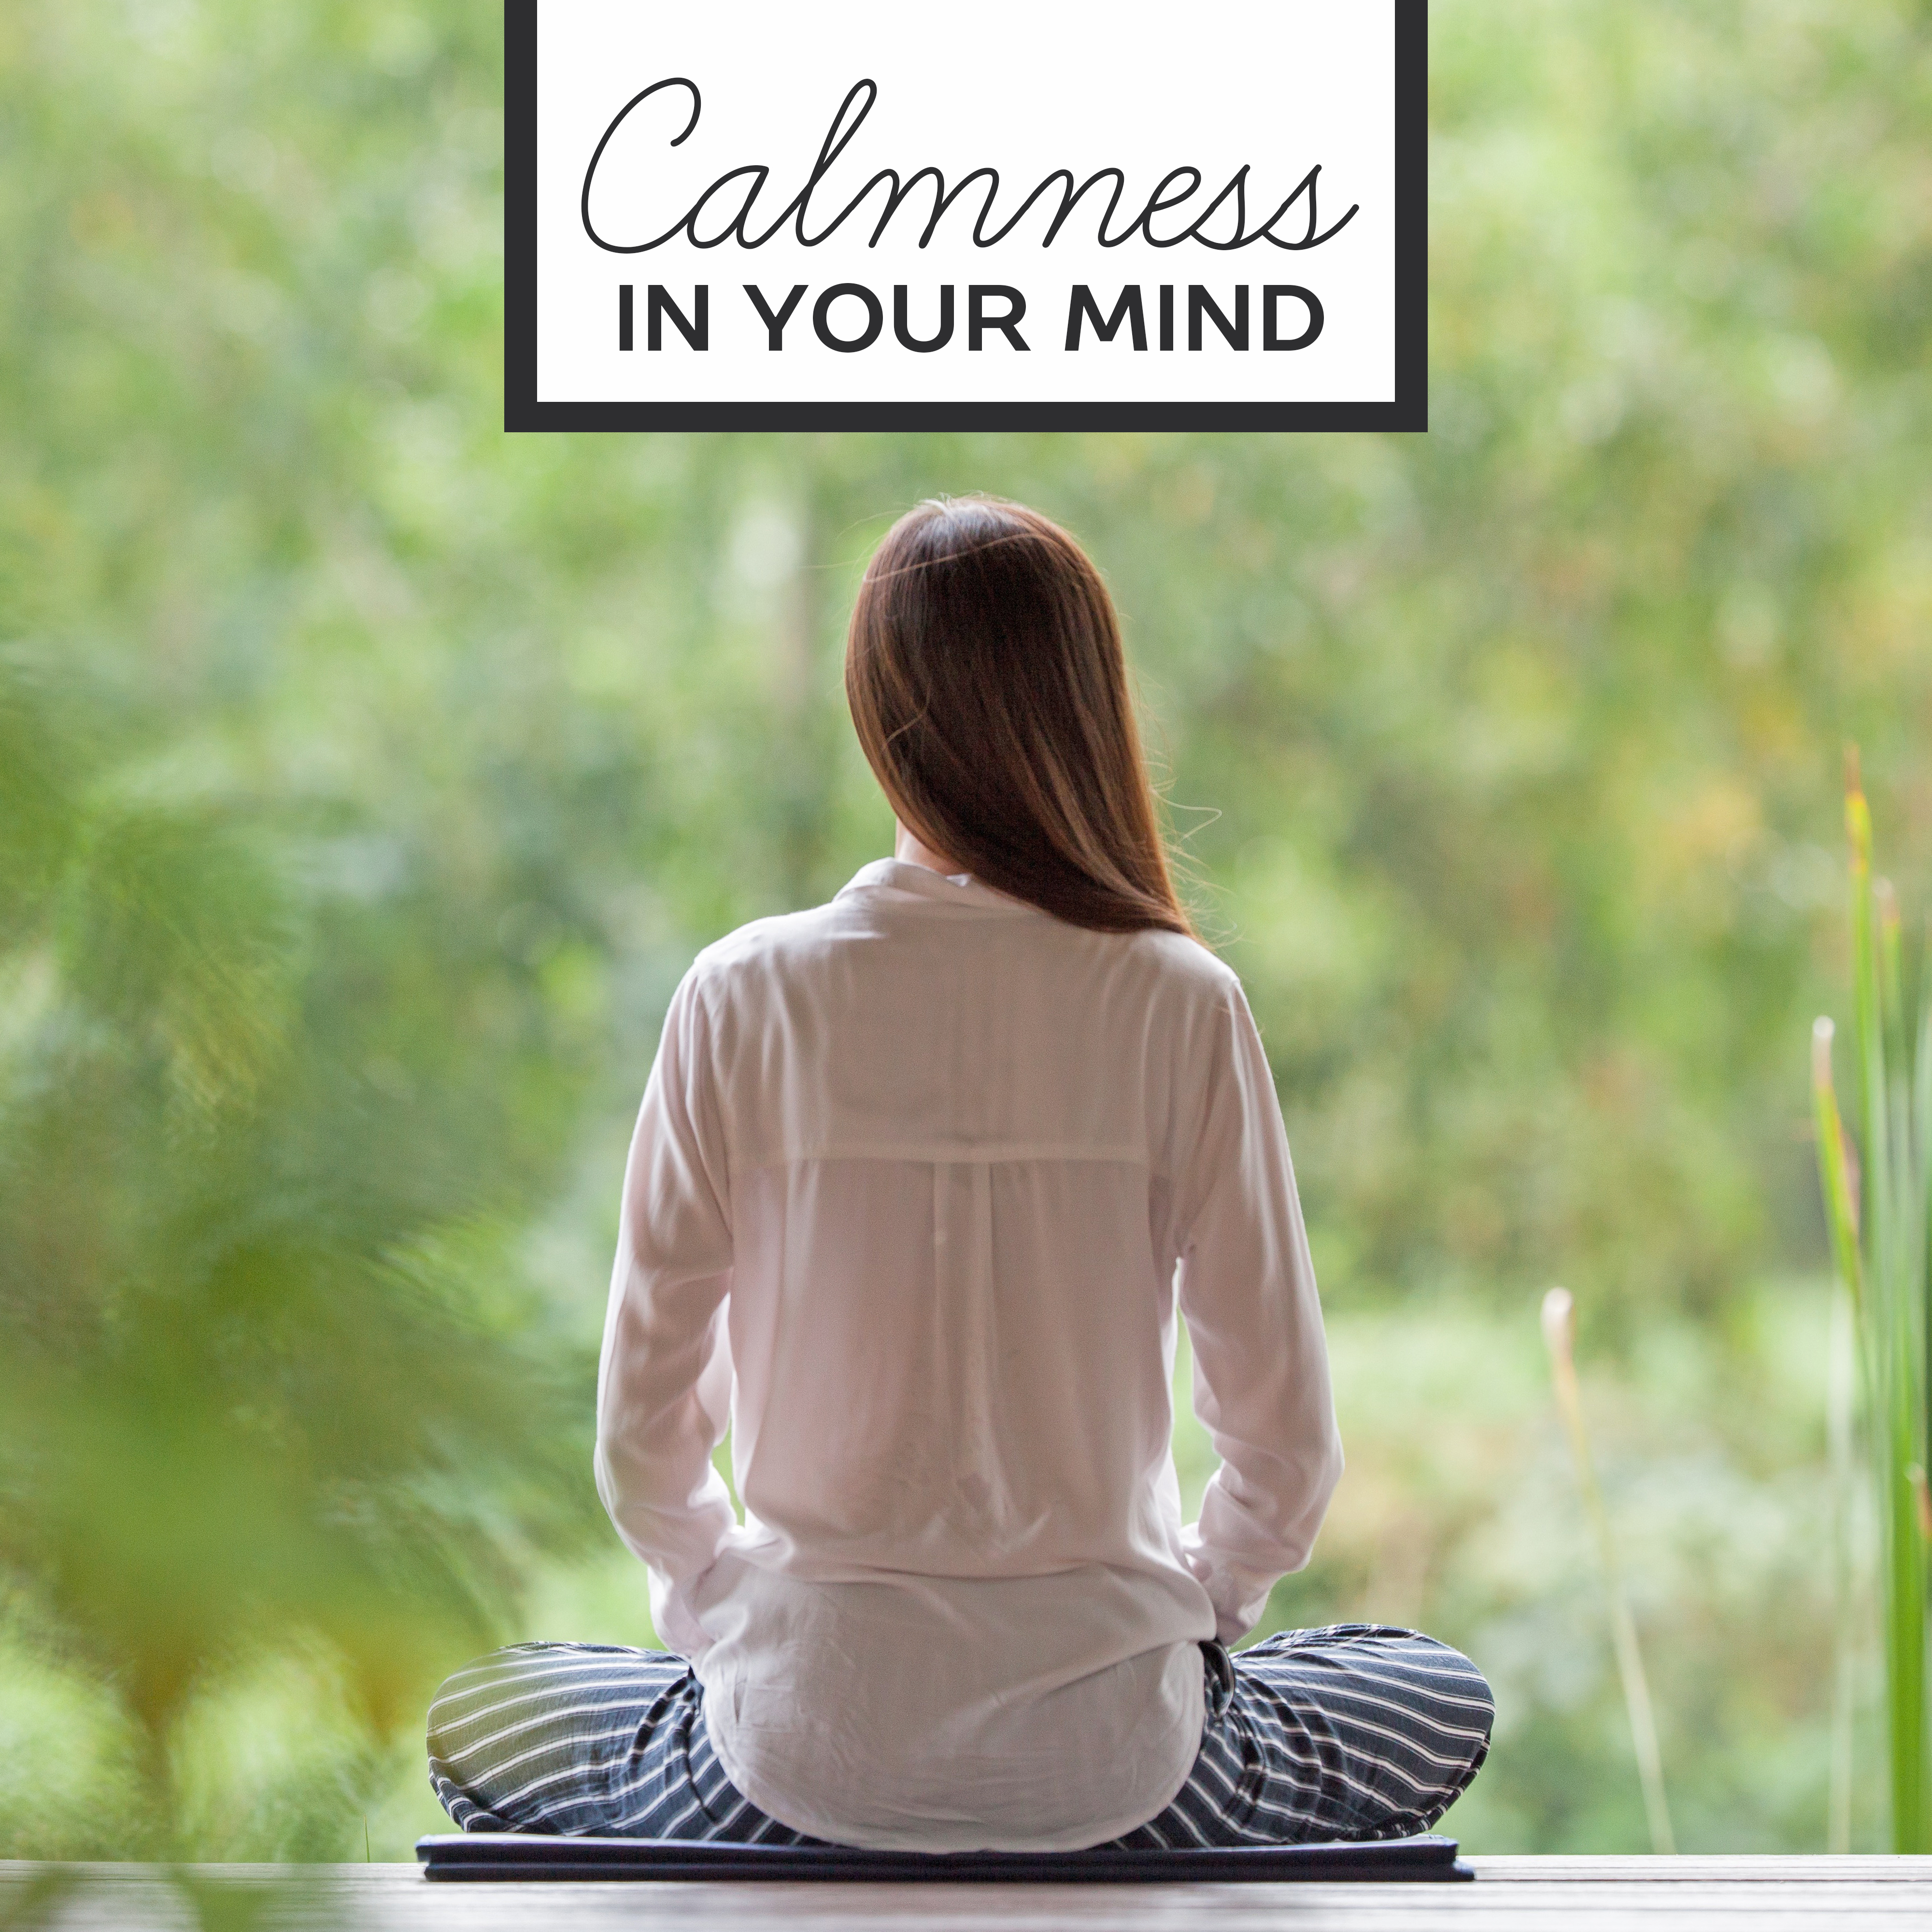 Calmness in Your Mind  Peaceful Sounds for Relaxation, Deep Relief, Calm Down, Just Relax, Meditation, Rest, Training Yoga, Soothing Melodies